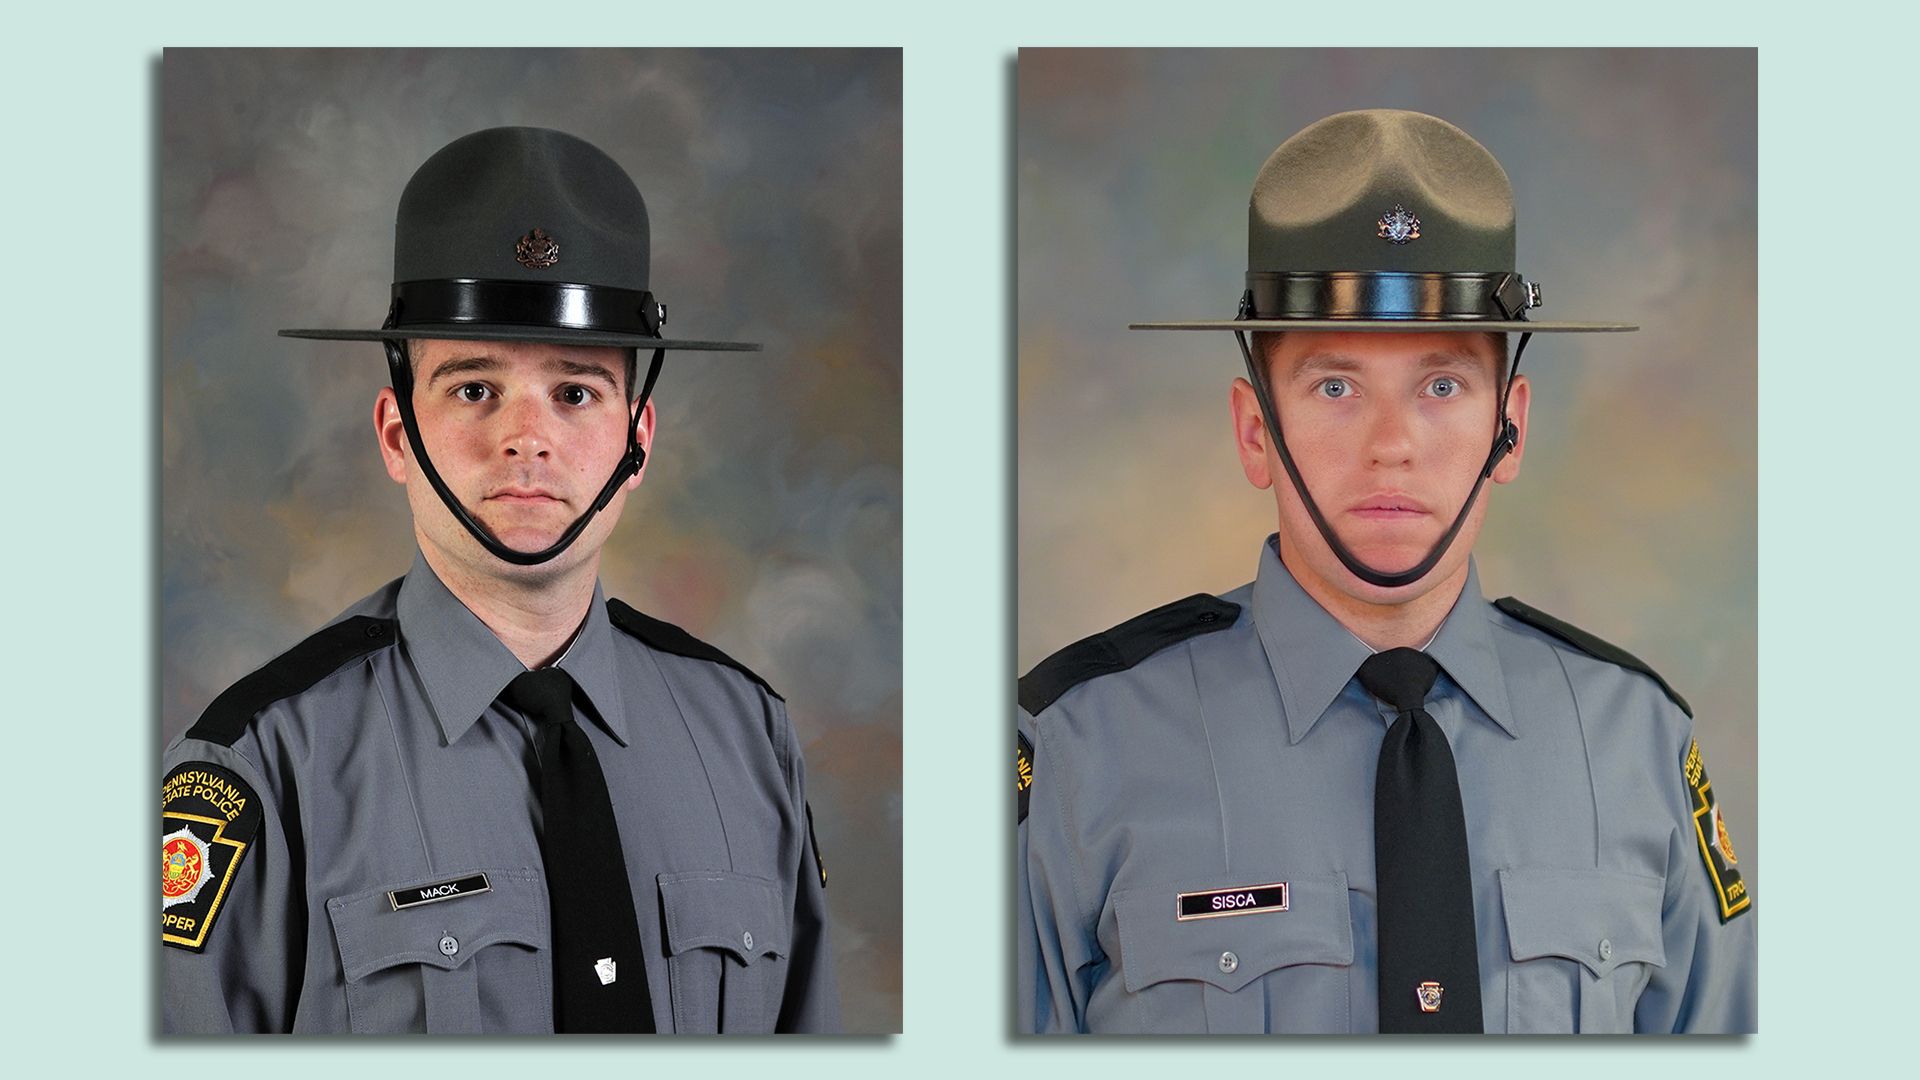 From left to right, state Troopers Martin Mack III and Branden Sisca. Photo courtesy of the Pennsylvania State Police